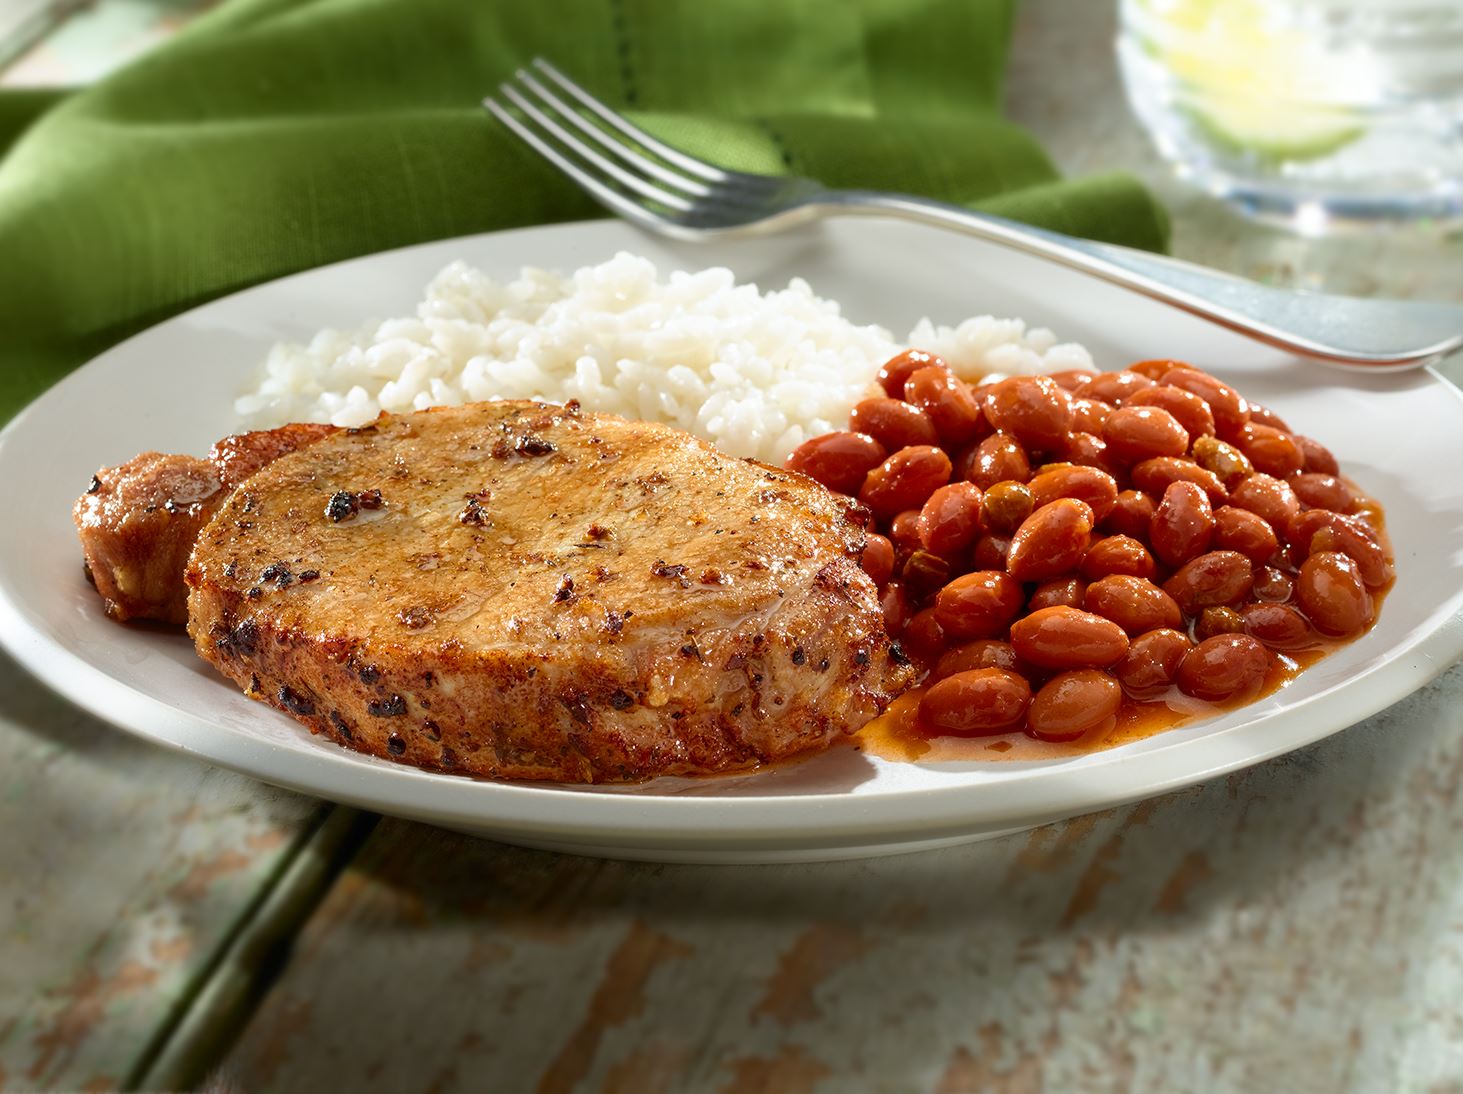 Fried Pork Chops with Rice and Pink Beans